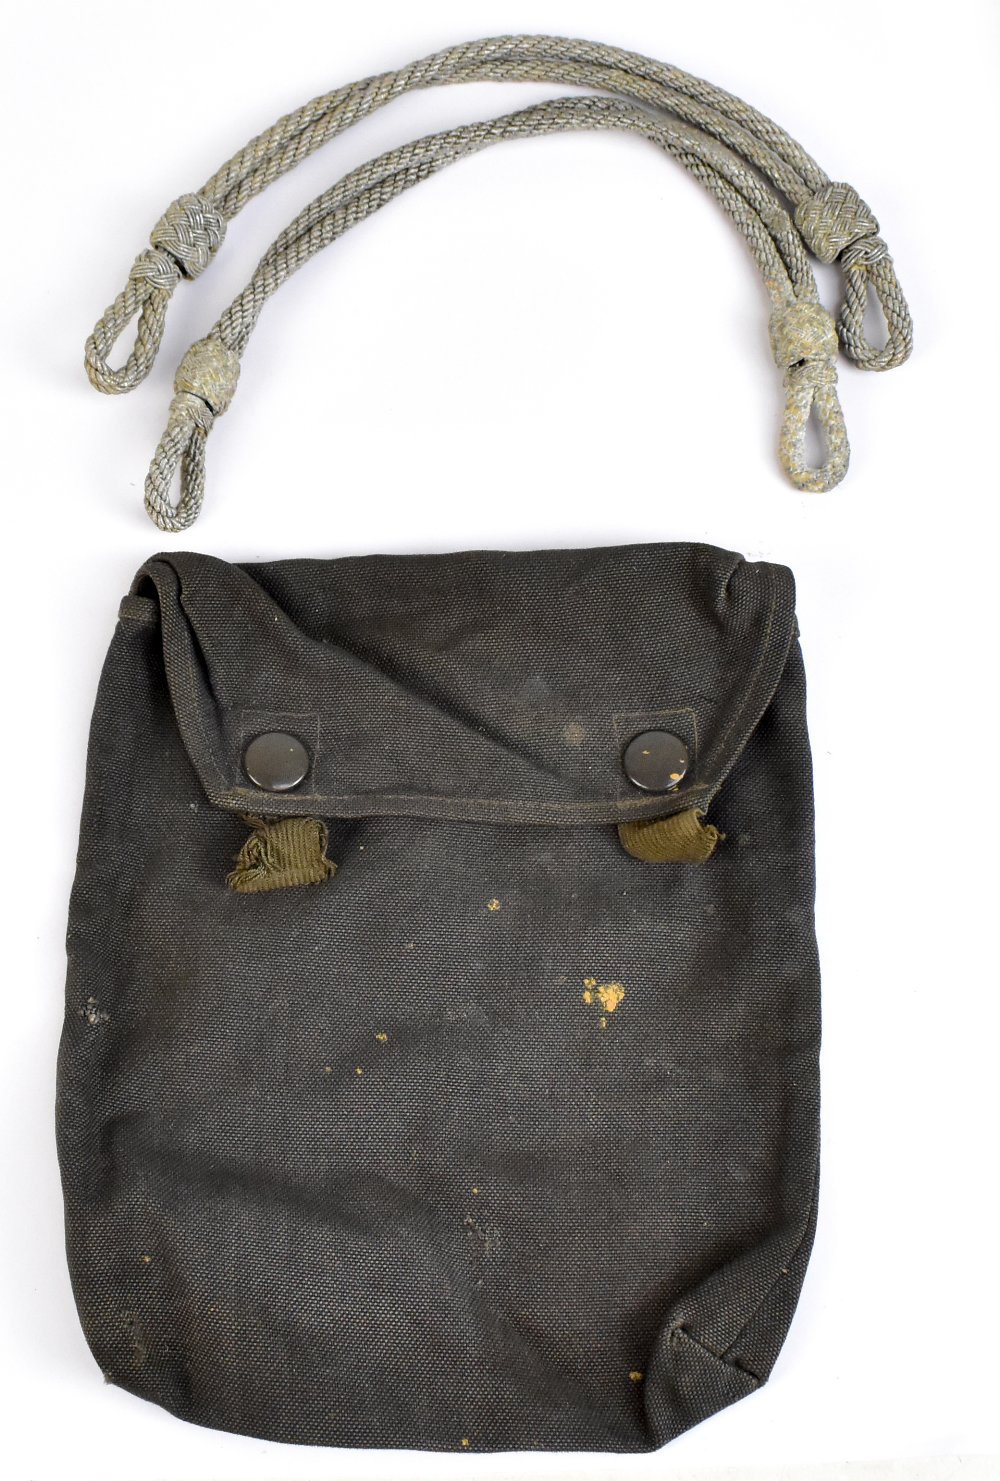 A pair of German WWII Third Reich chin cords for officers' caps, also a military canvas pouch with